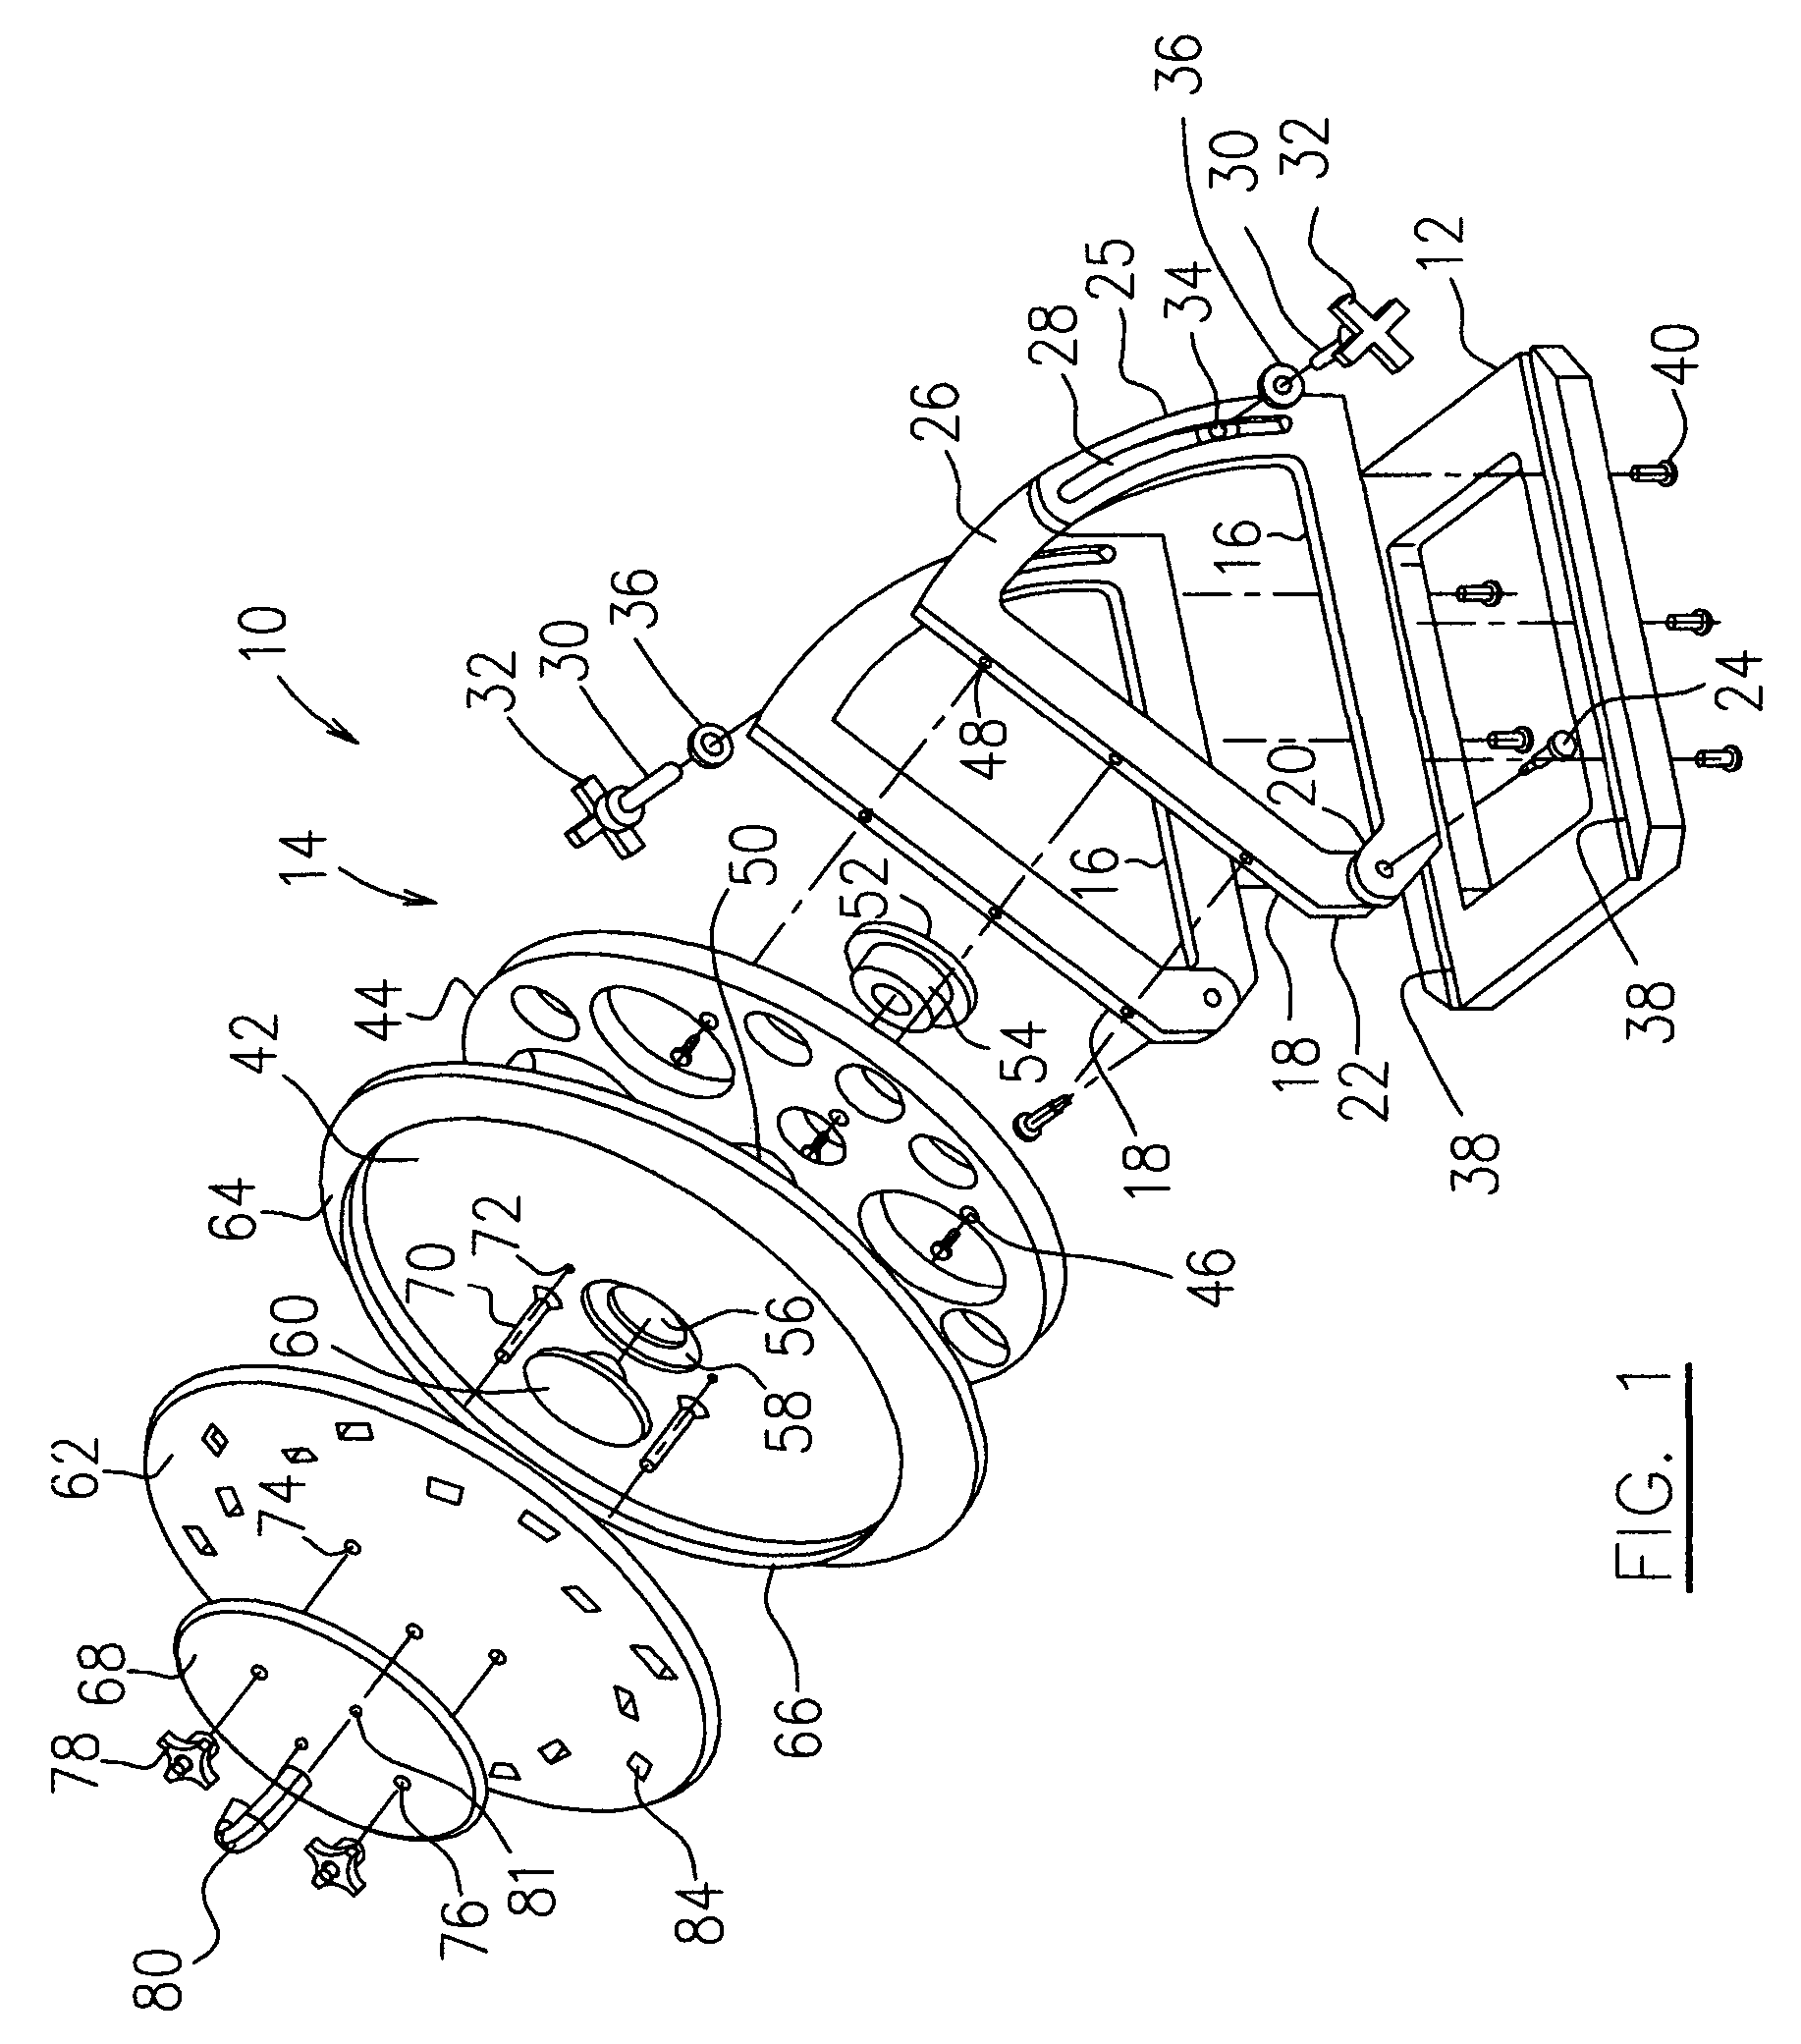 Apparatus for supporting airfoils in a grit blasting process